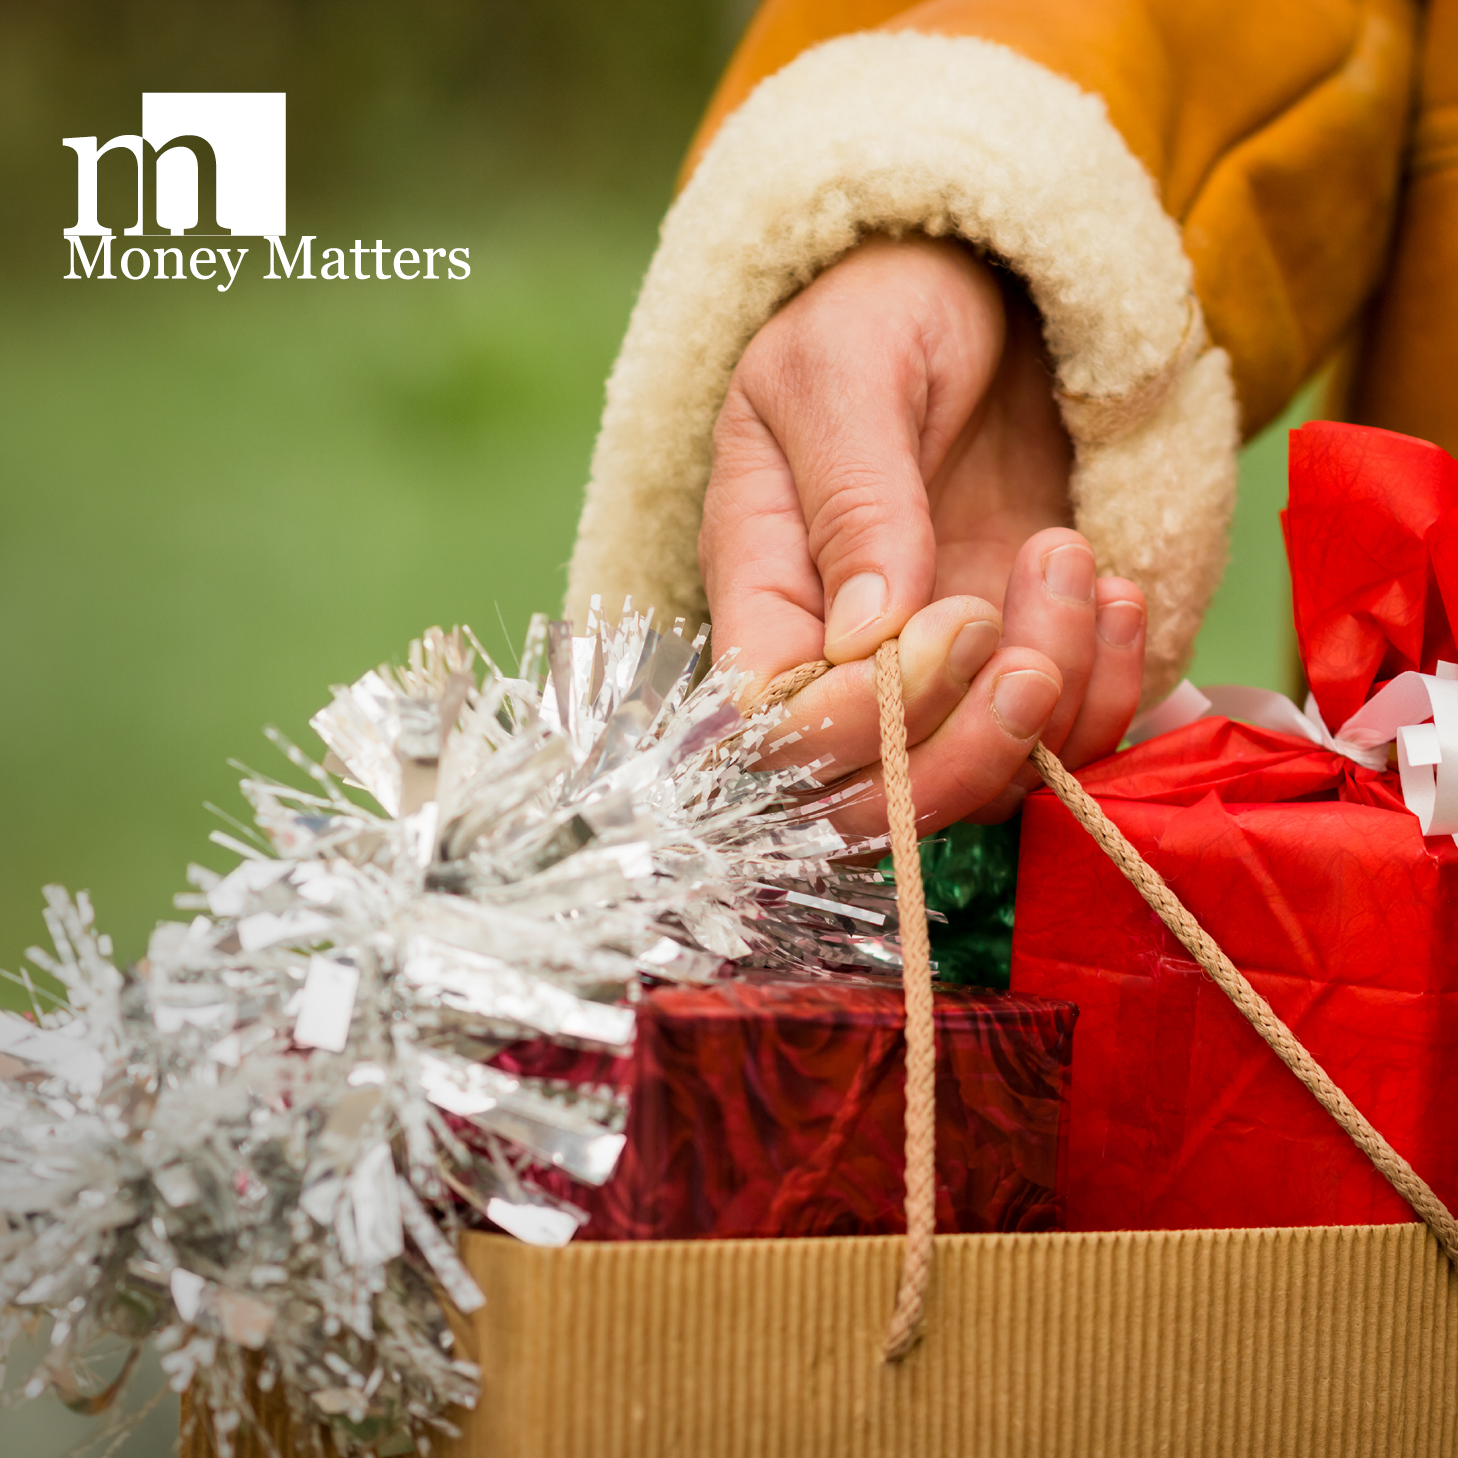 A person's hand is shown, holding a bag of gifts.